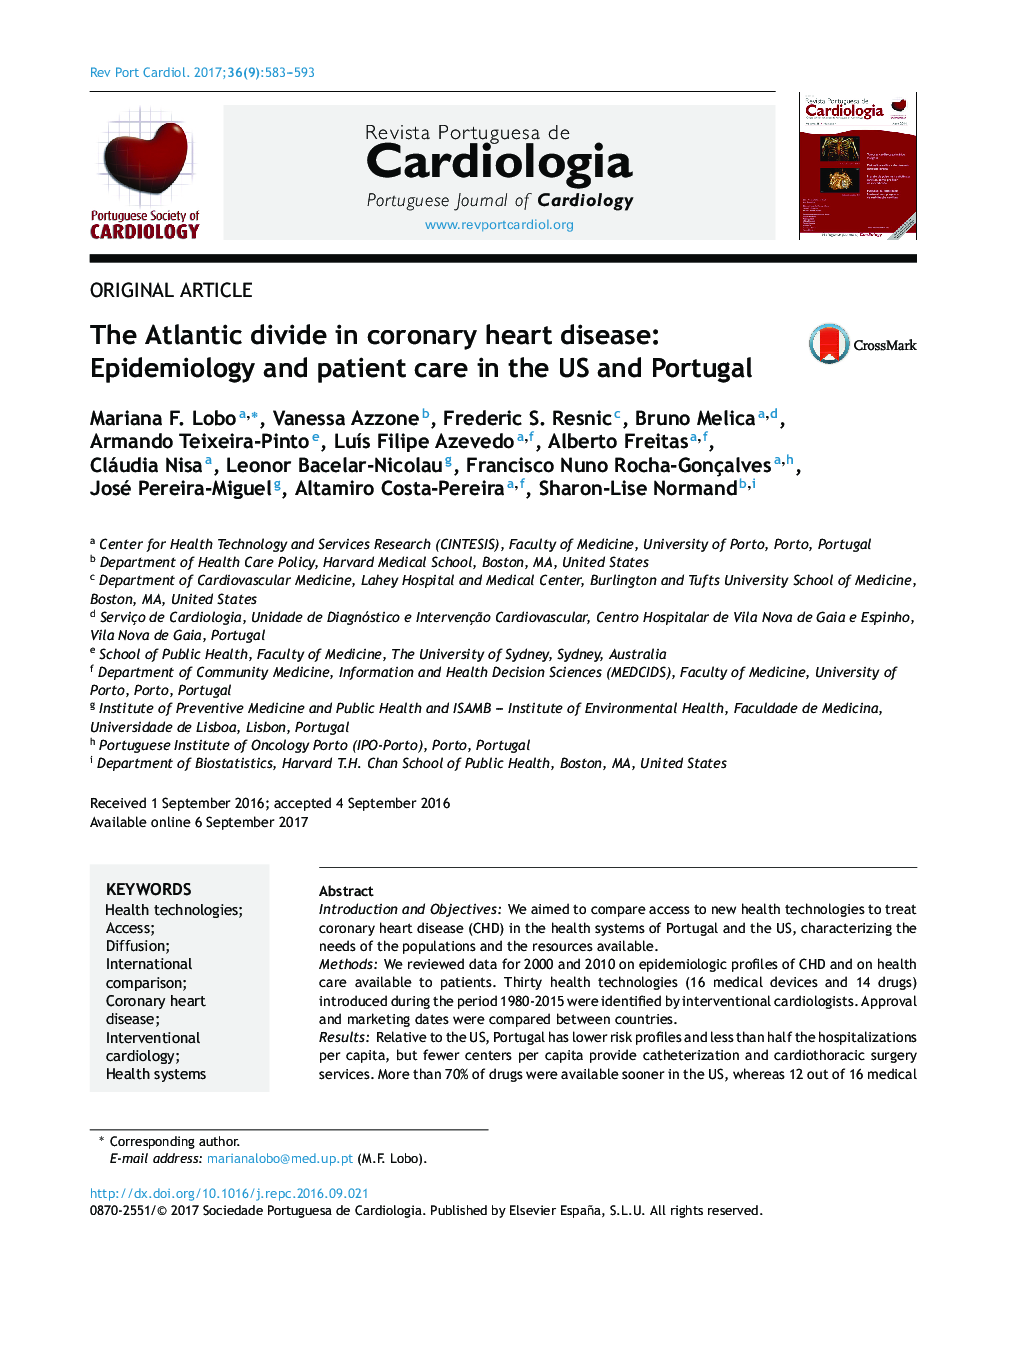 The Atlantic divide in coronary heart disease: Epidemiology and patient care in the US and Portugal